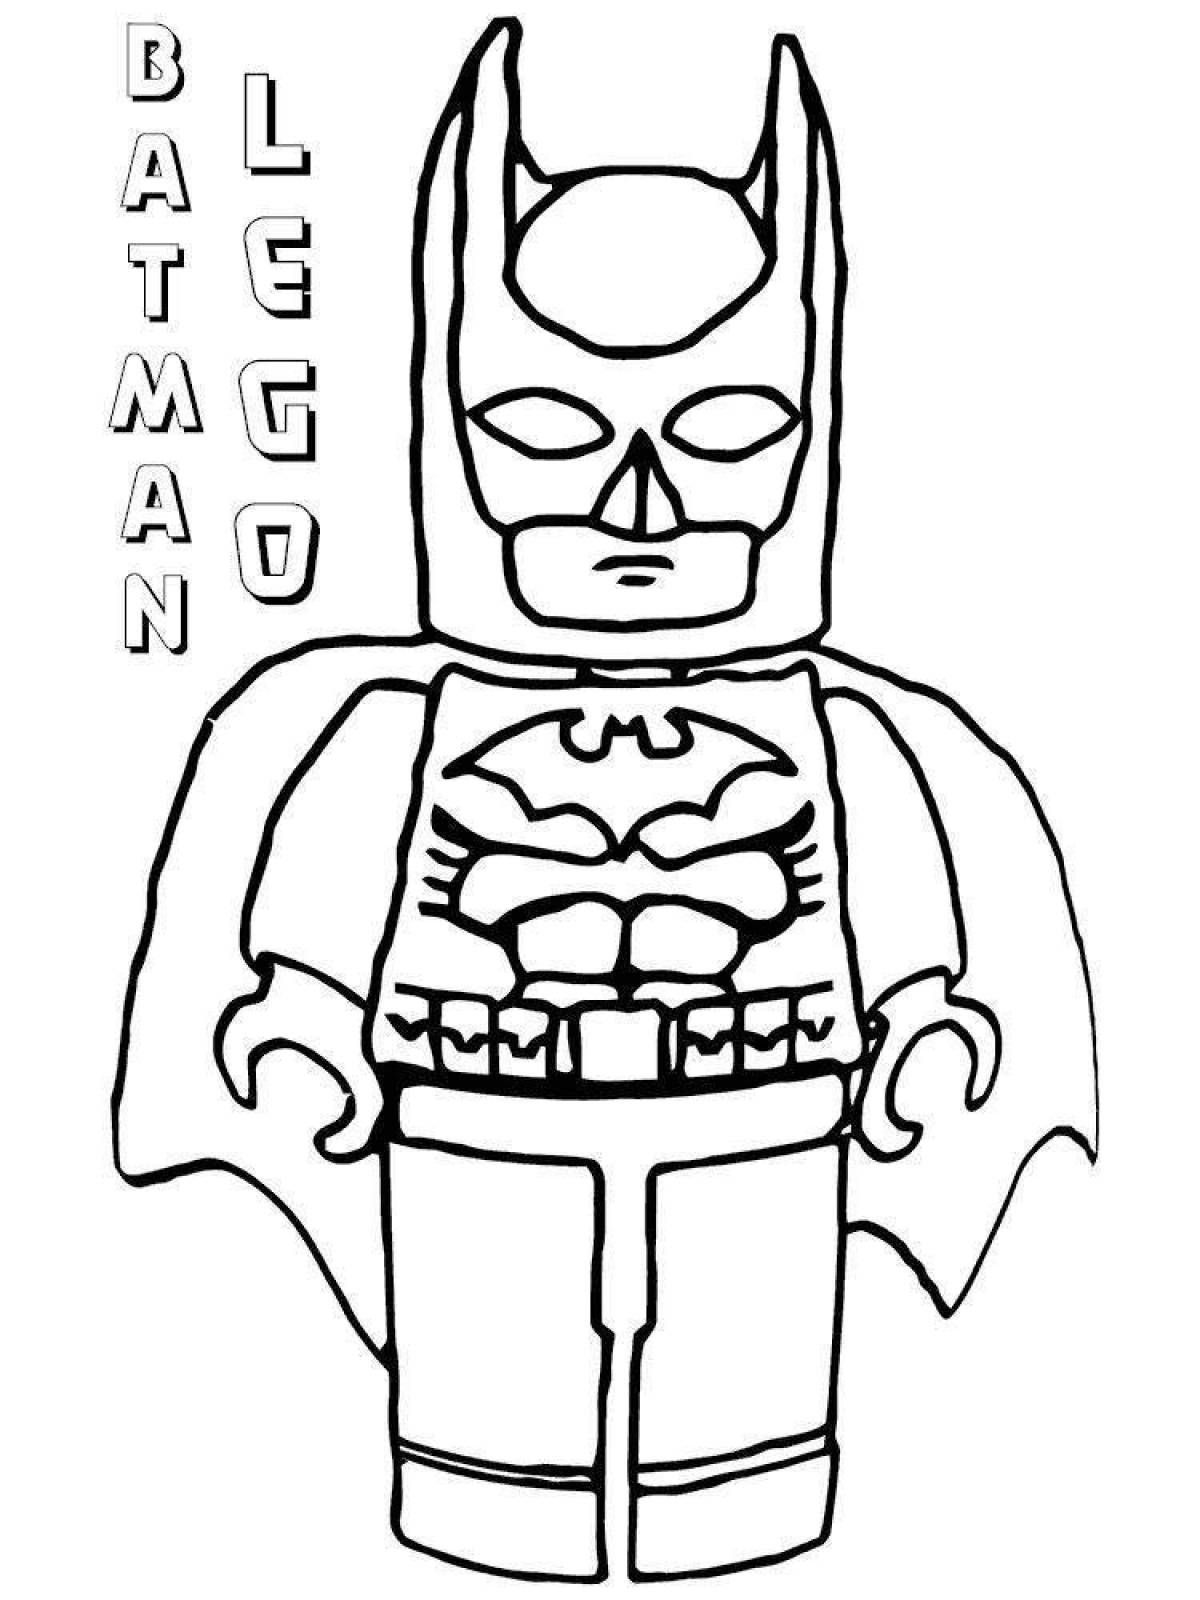 Lovely lego batman coloring page